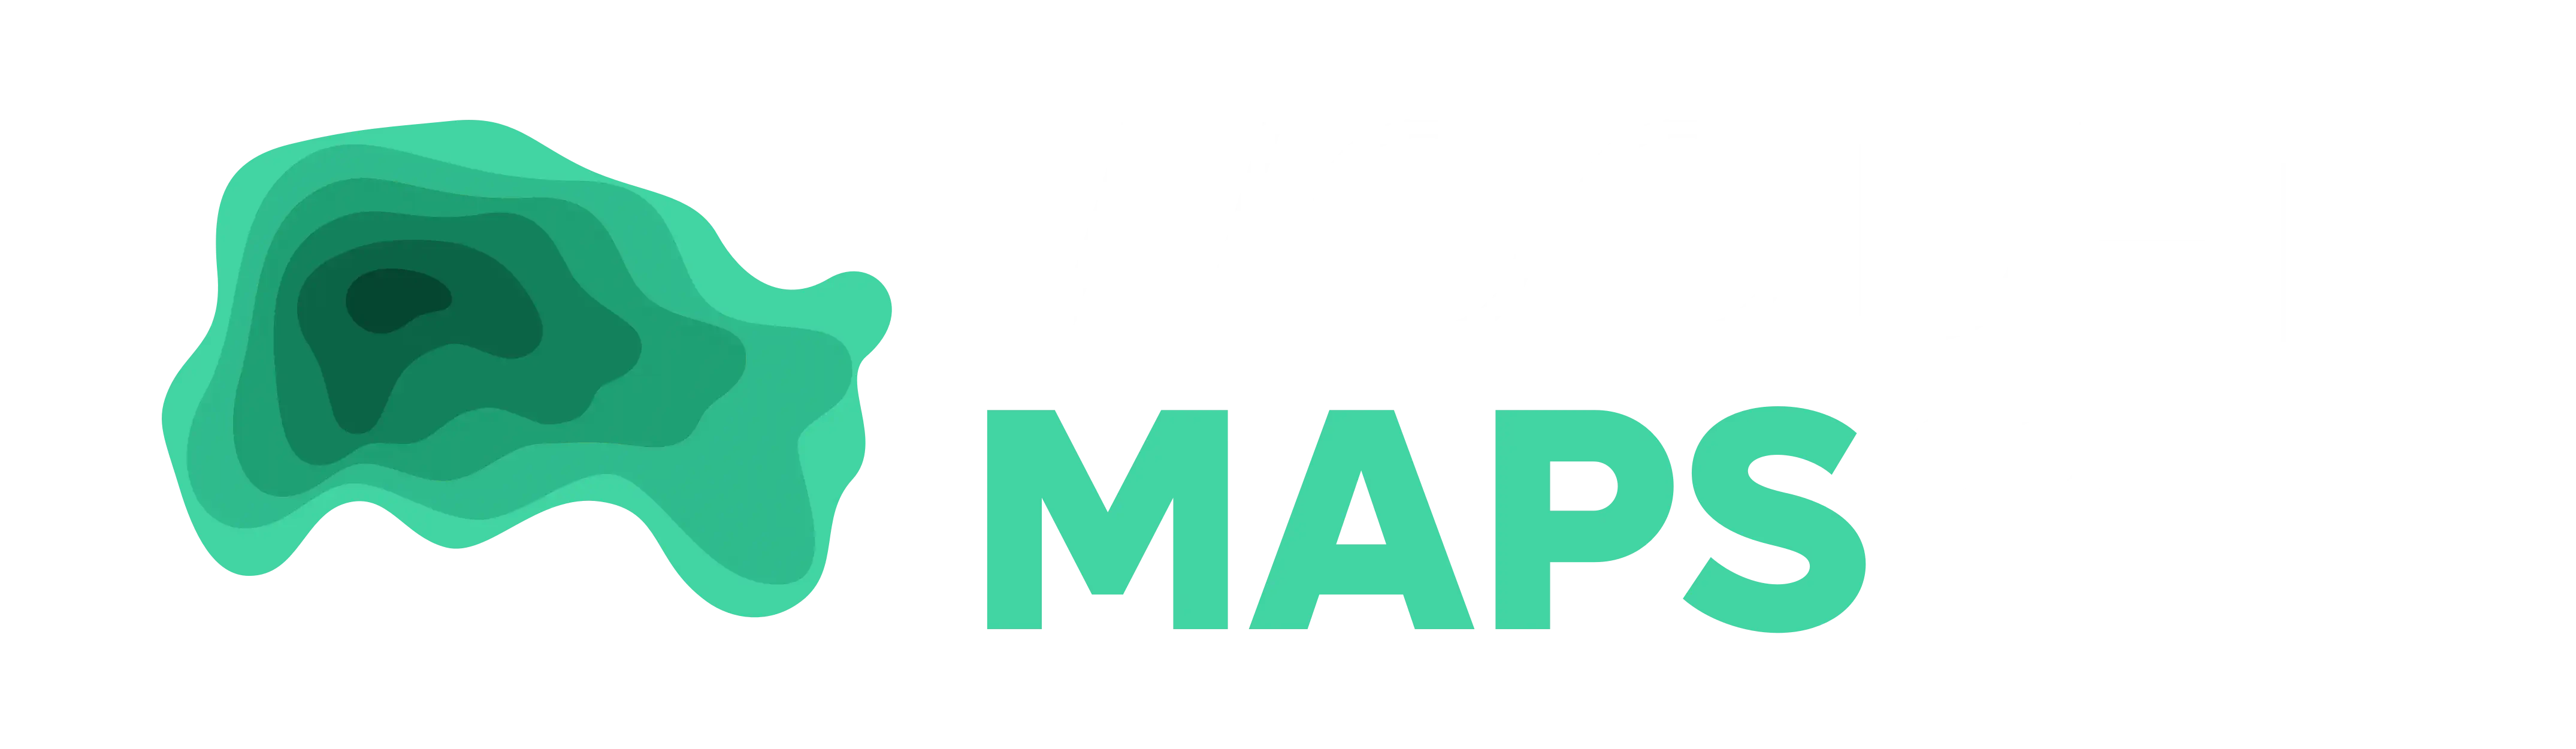 the logo of Wooden Maps Co in green